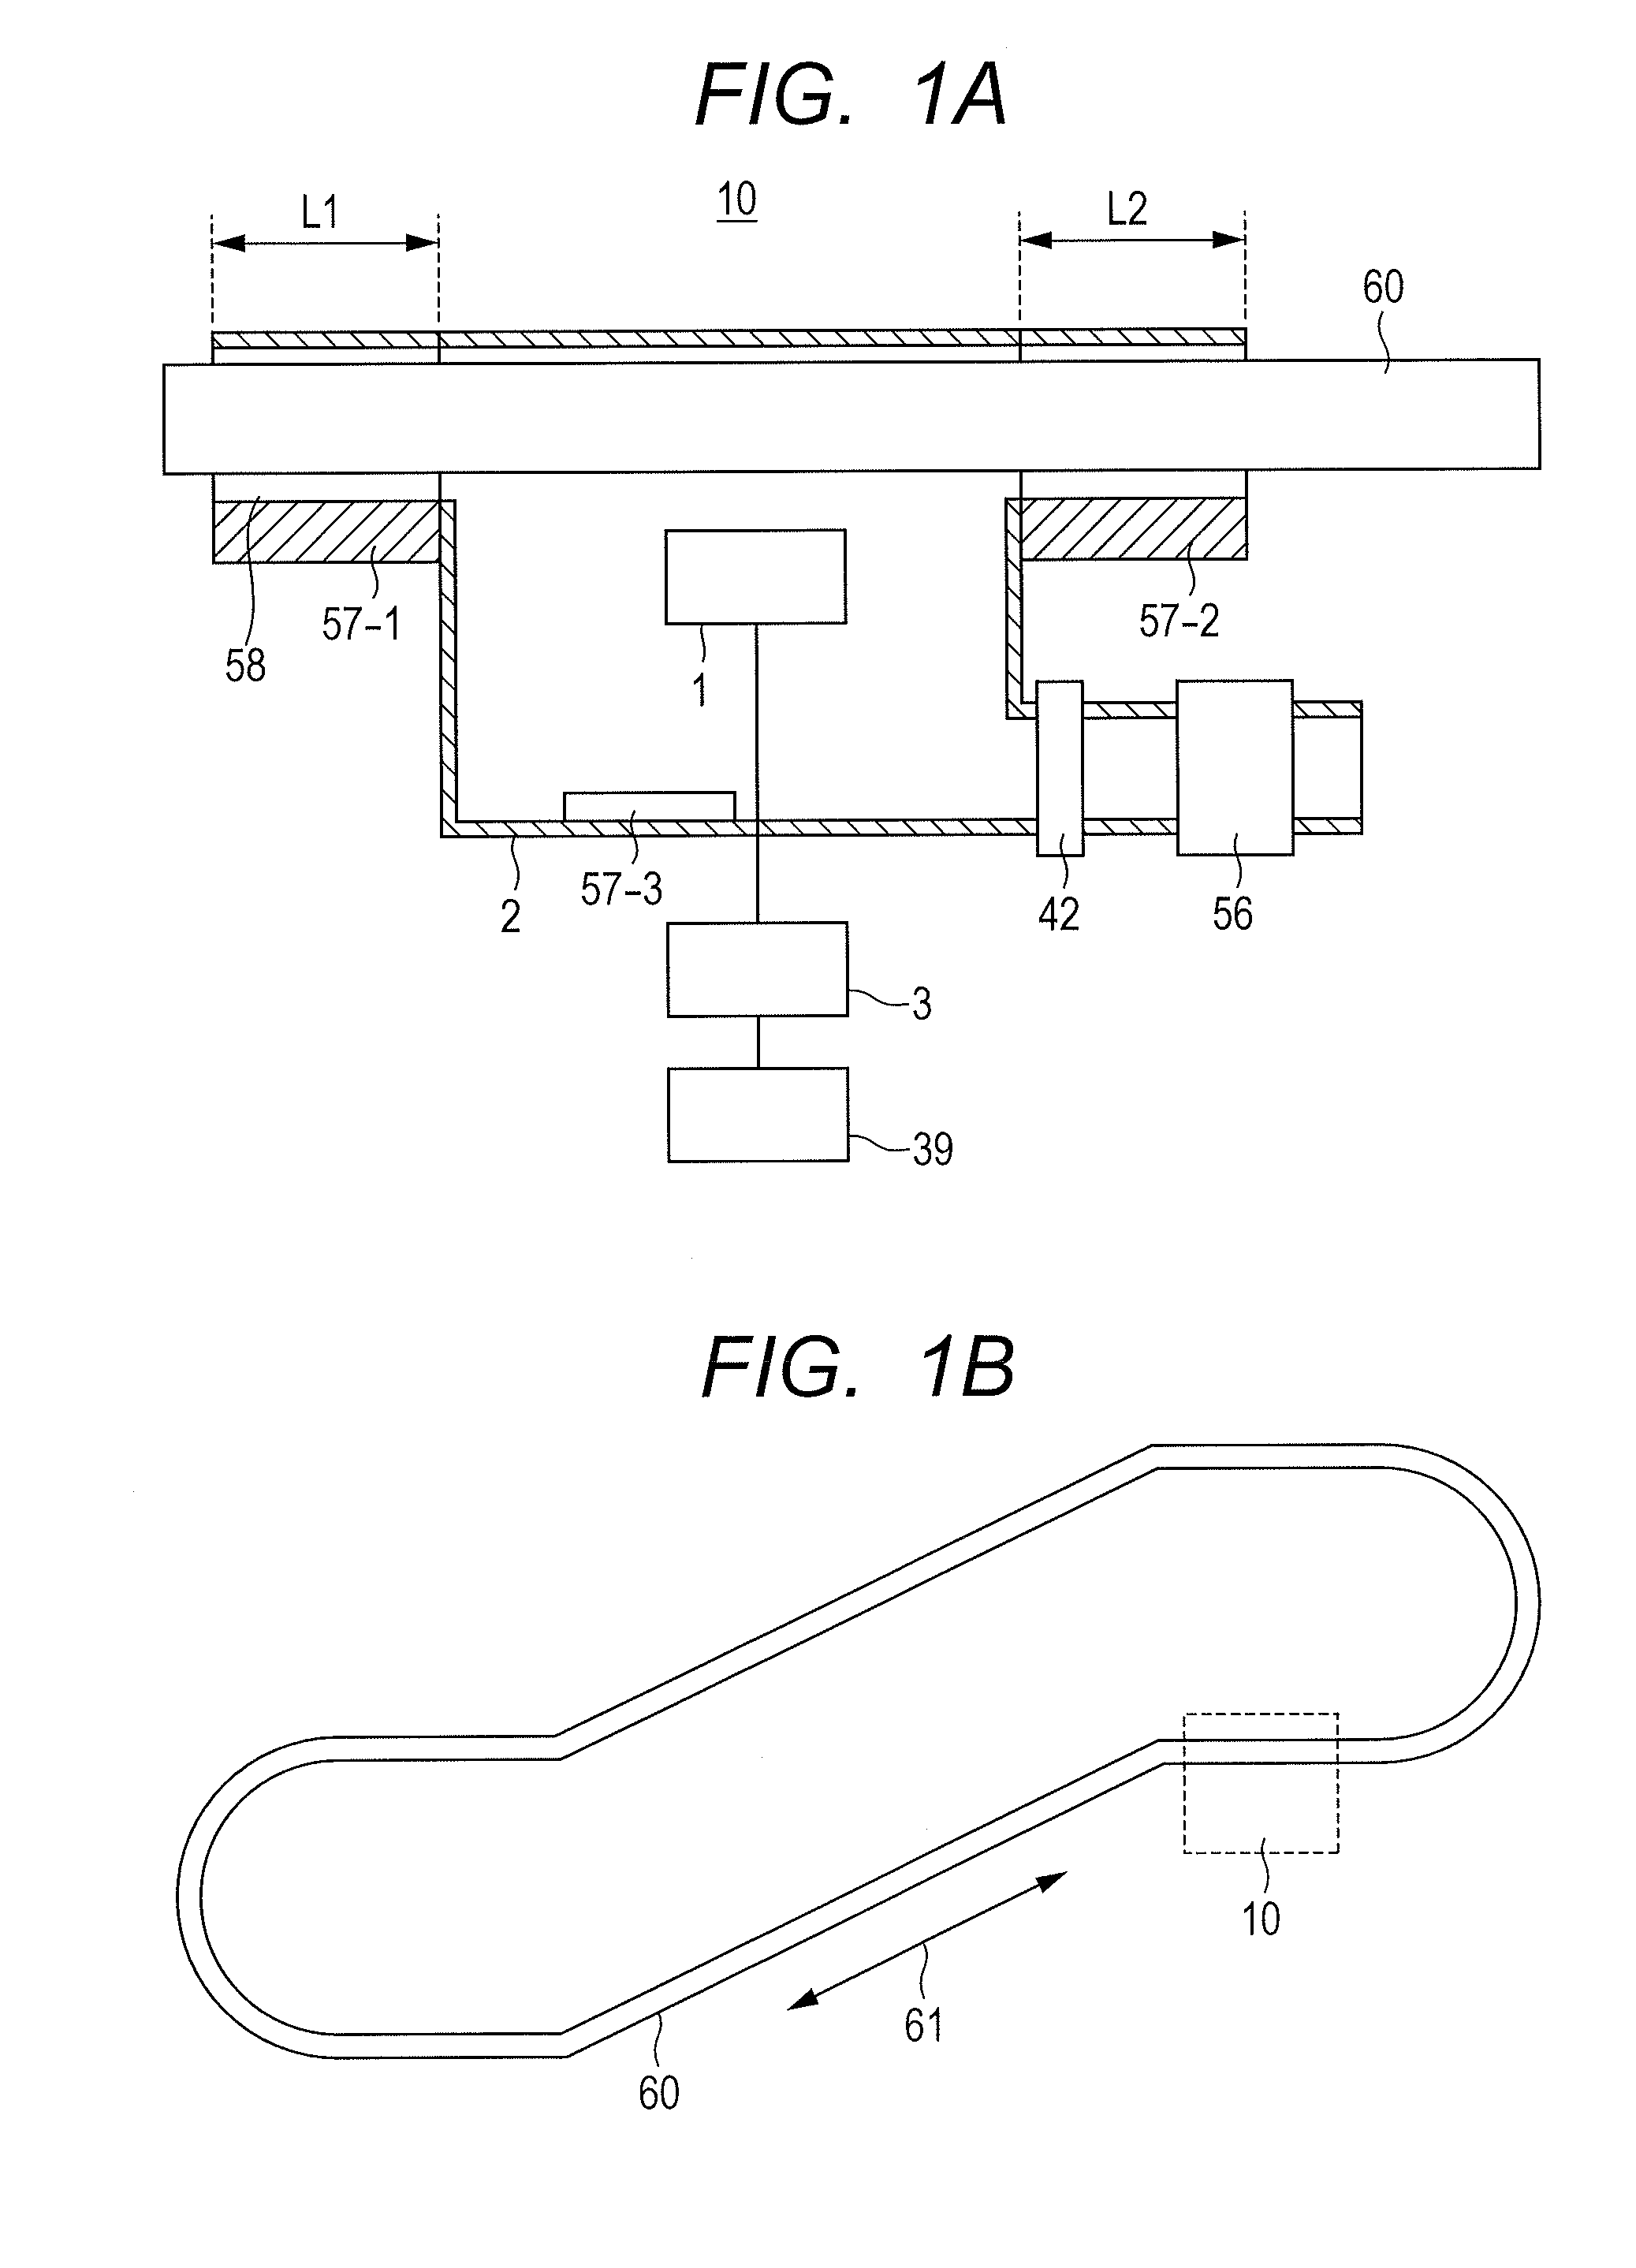 Plasma Sterilization and Cleaning Treatment Device for Escalator, and Escalator Using the Same